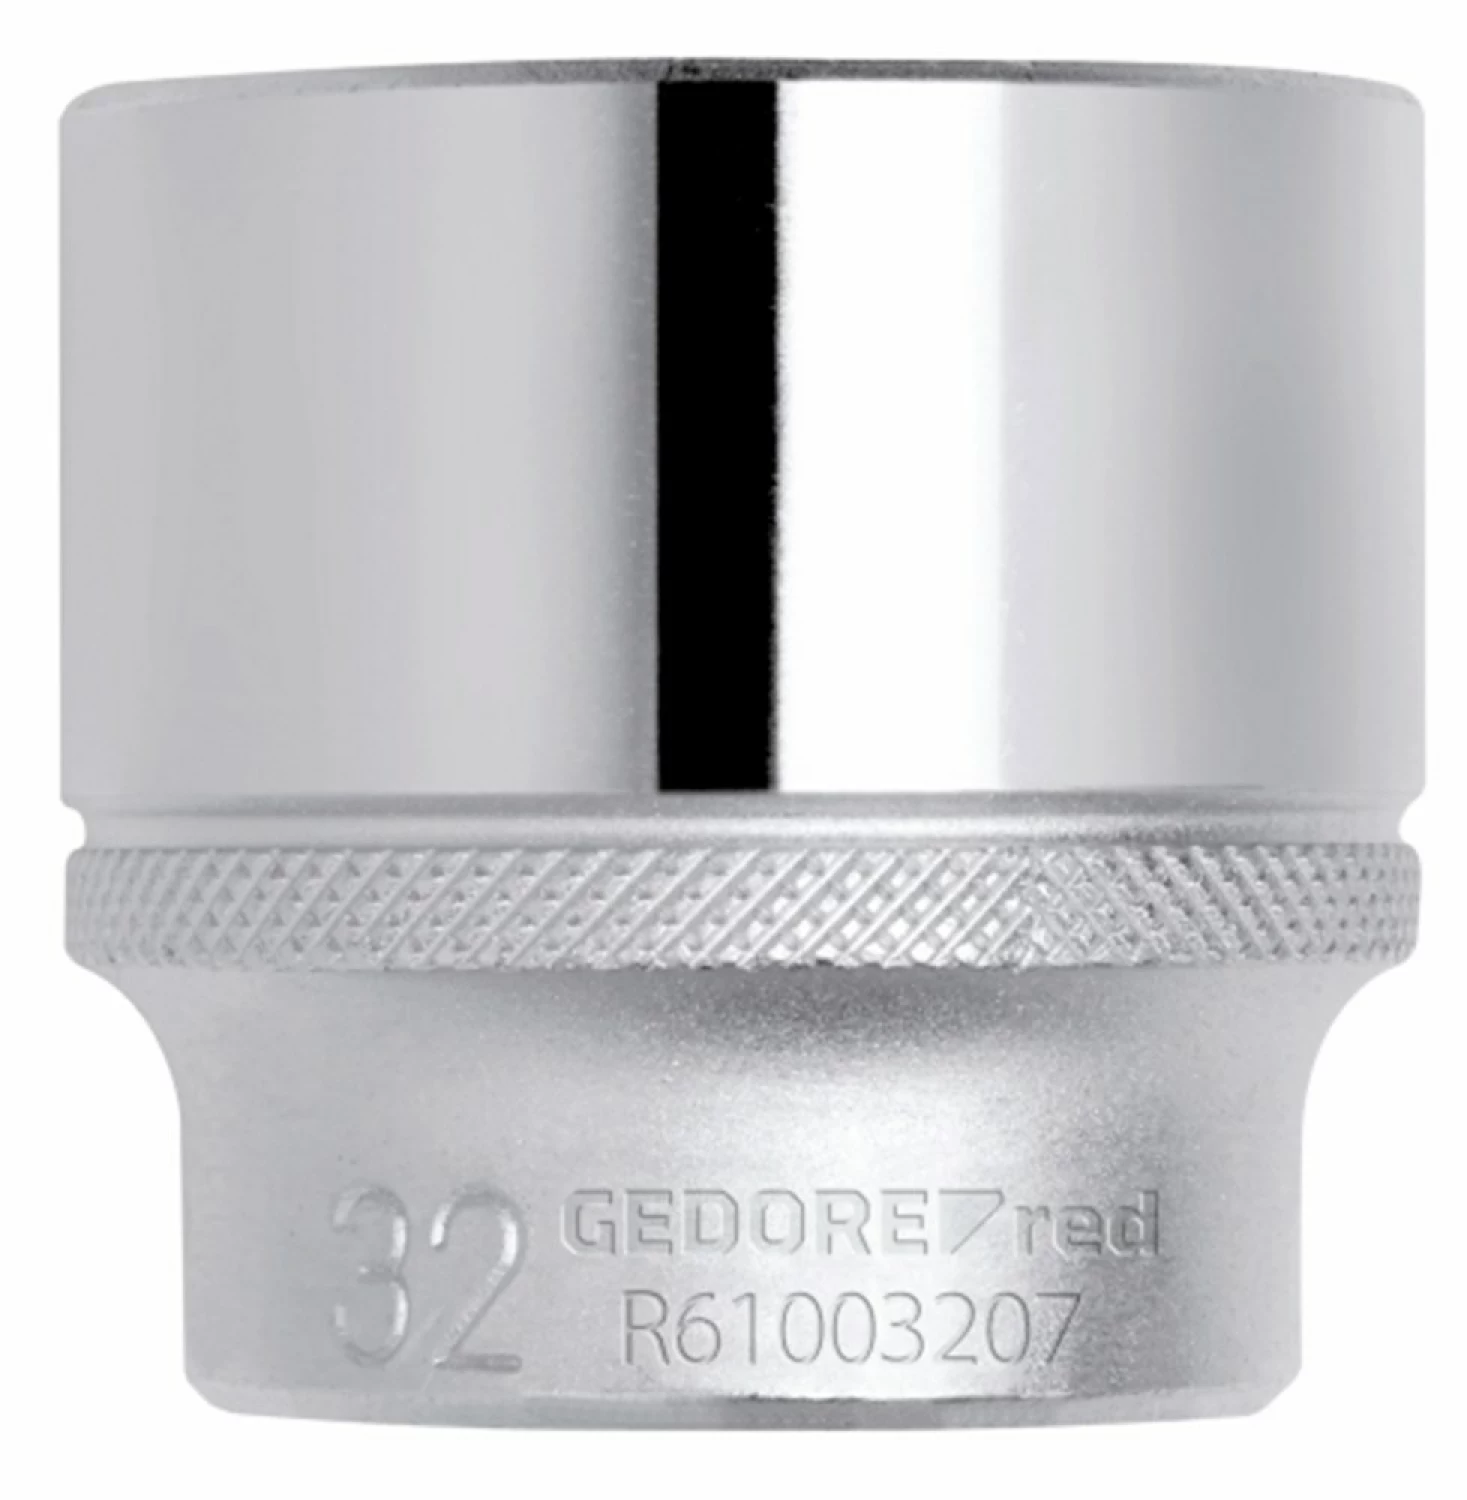 Gedore RED R61001606 Dopsleutel - 1/2" - 16 x 38mm